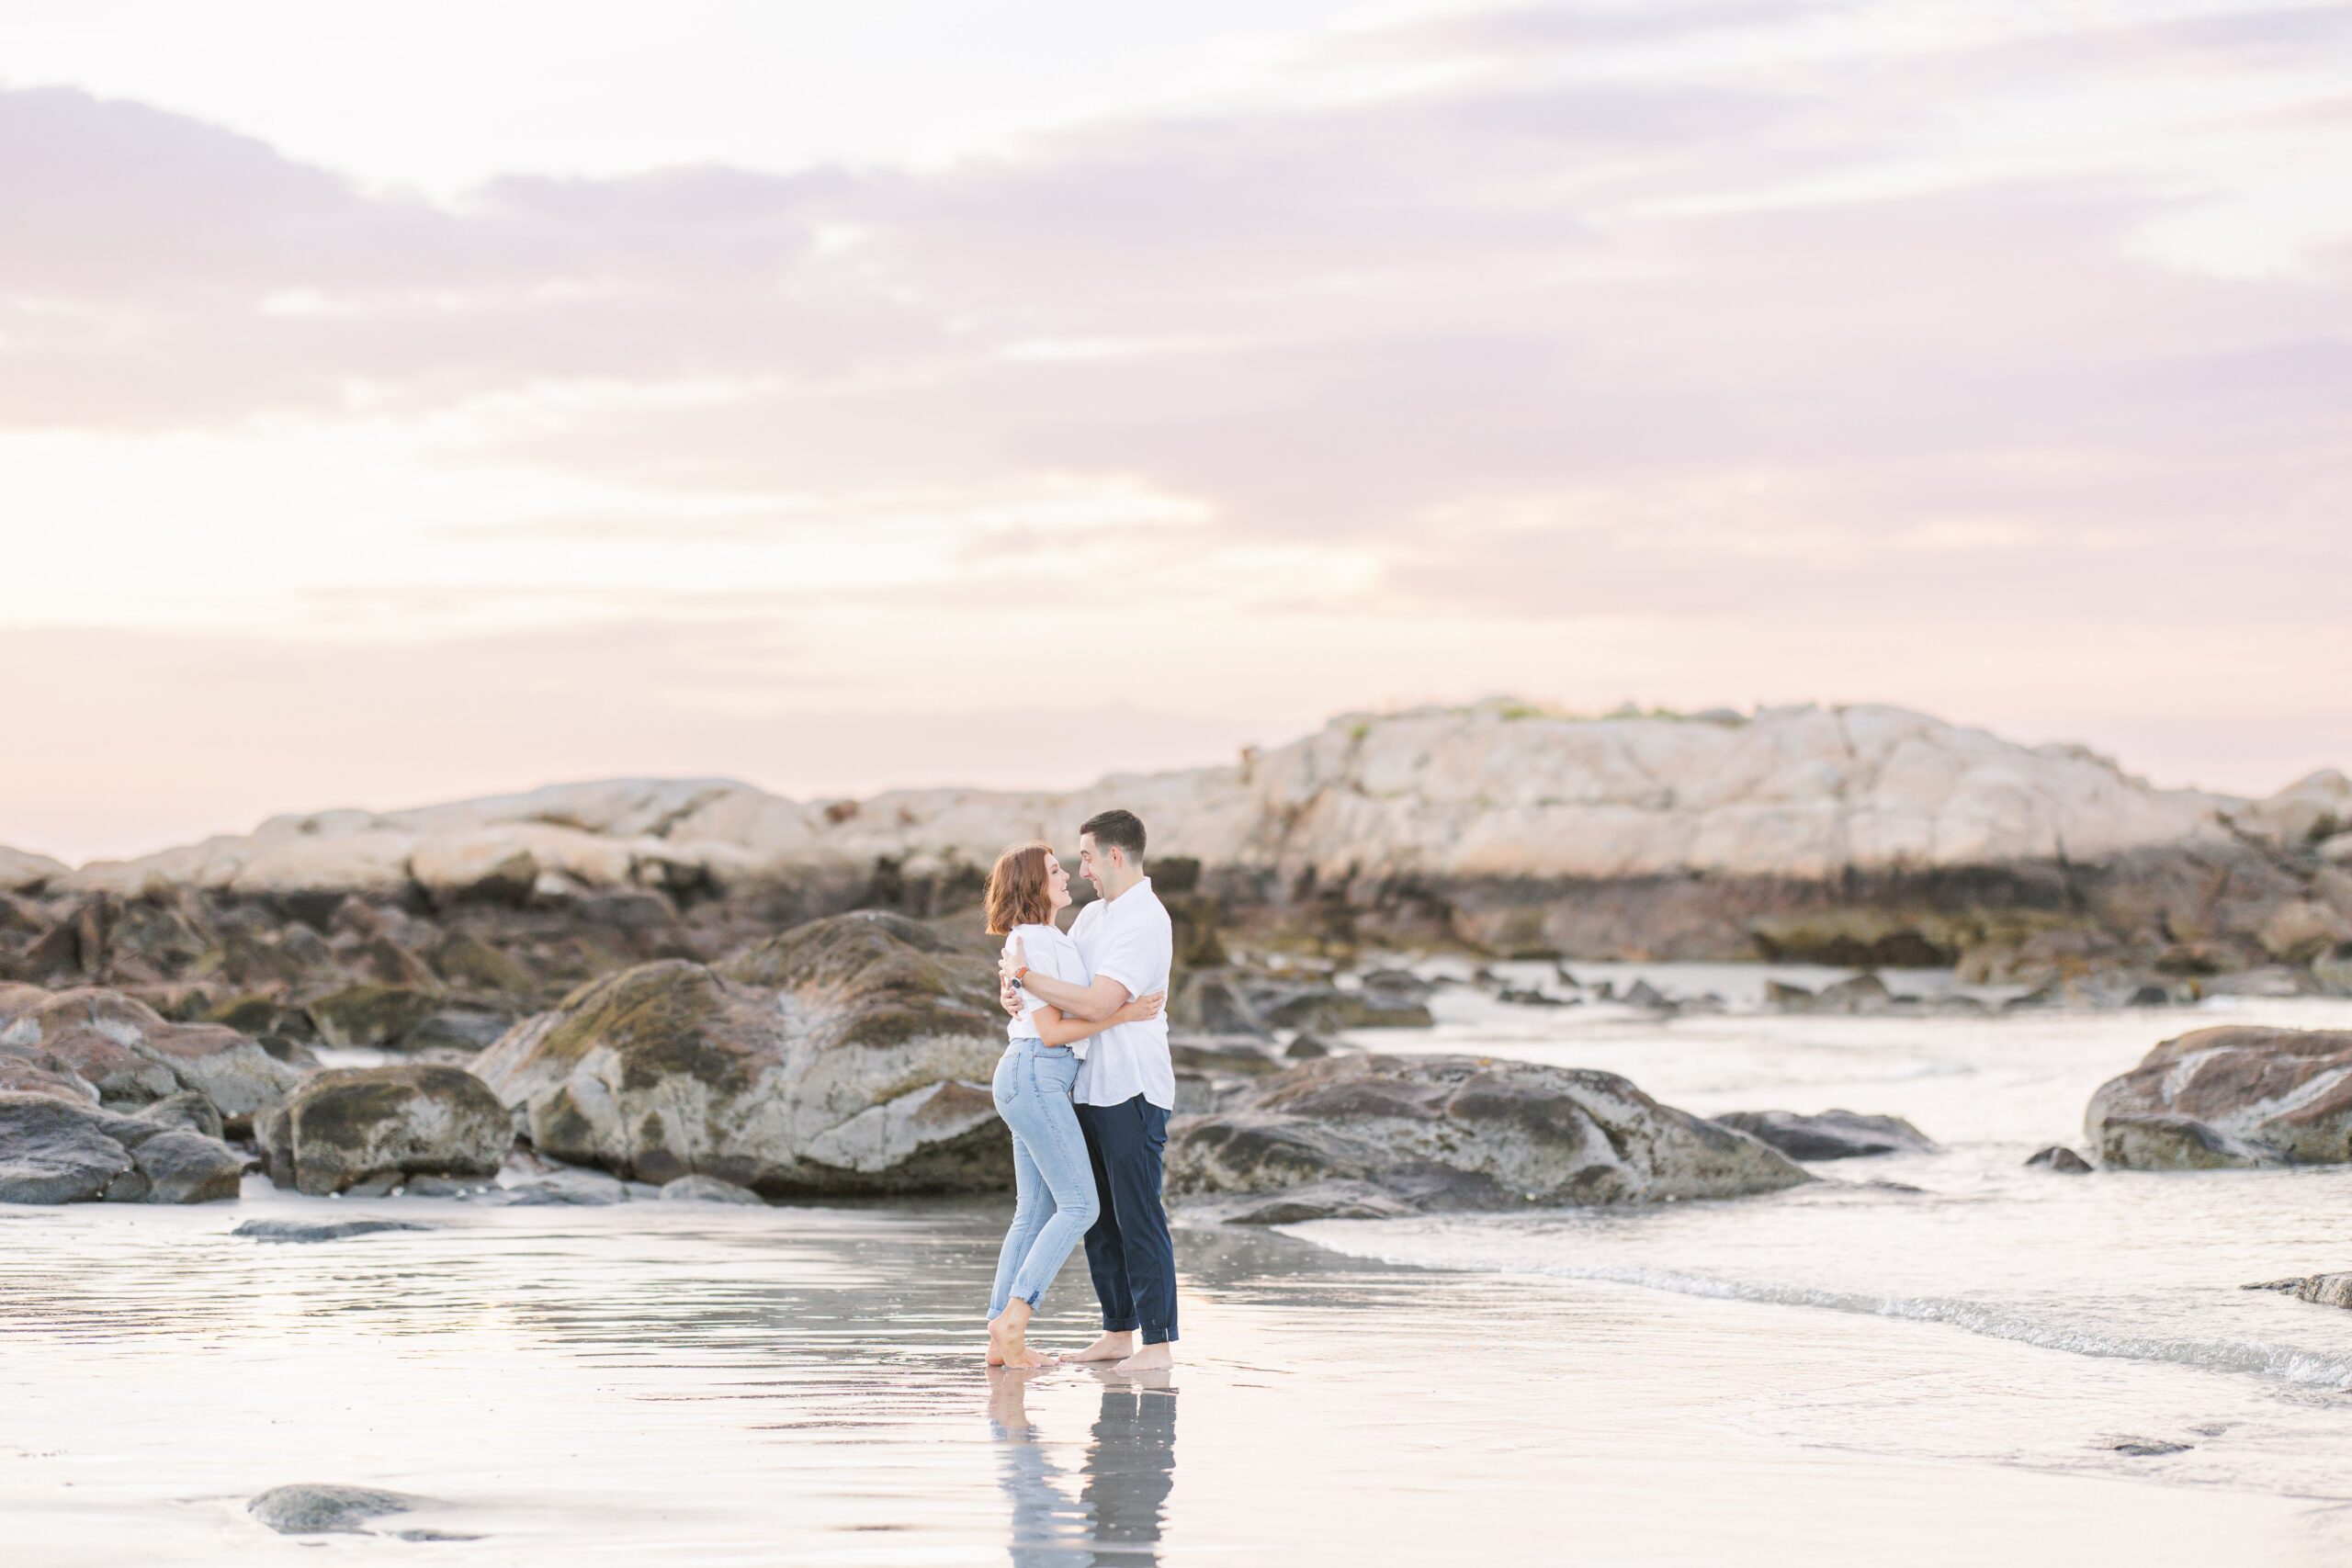 A couple hugs while standing in shallow water at Wingaersheek beach, surrounded by large rocks and a sunset sky.